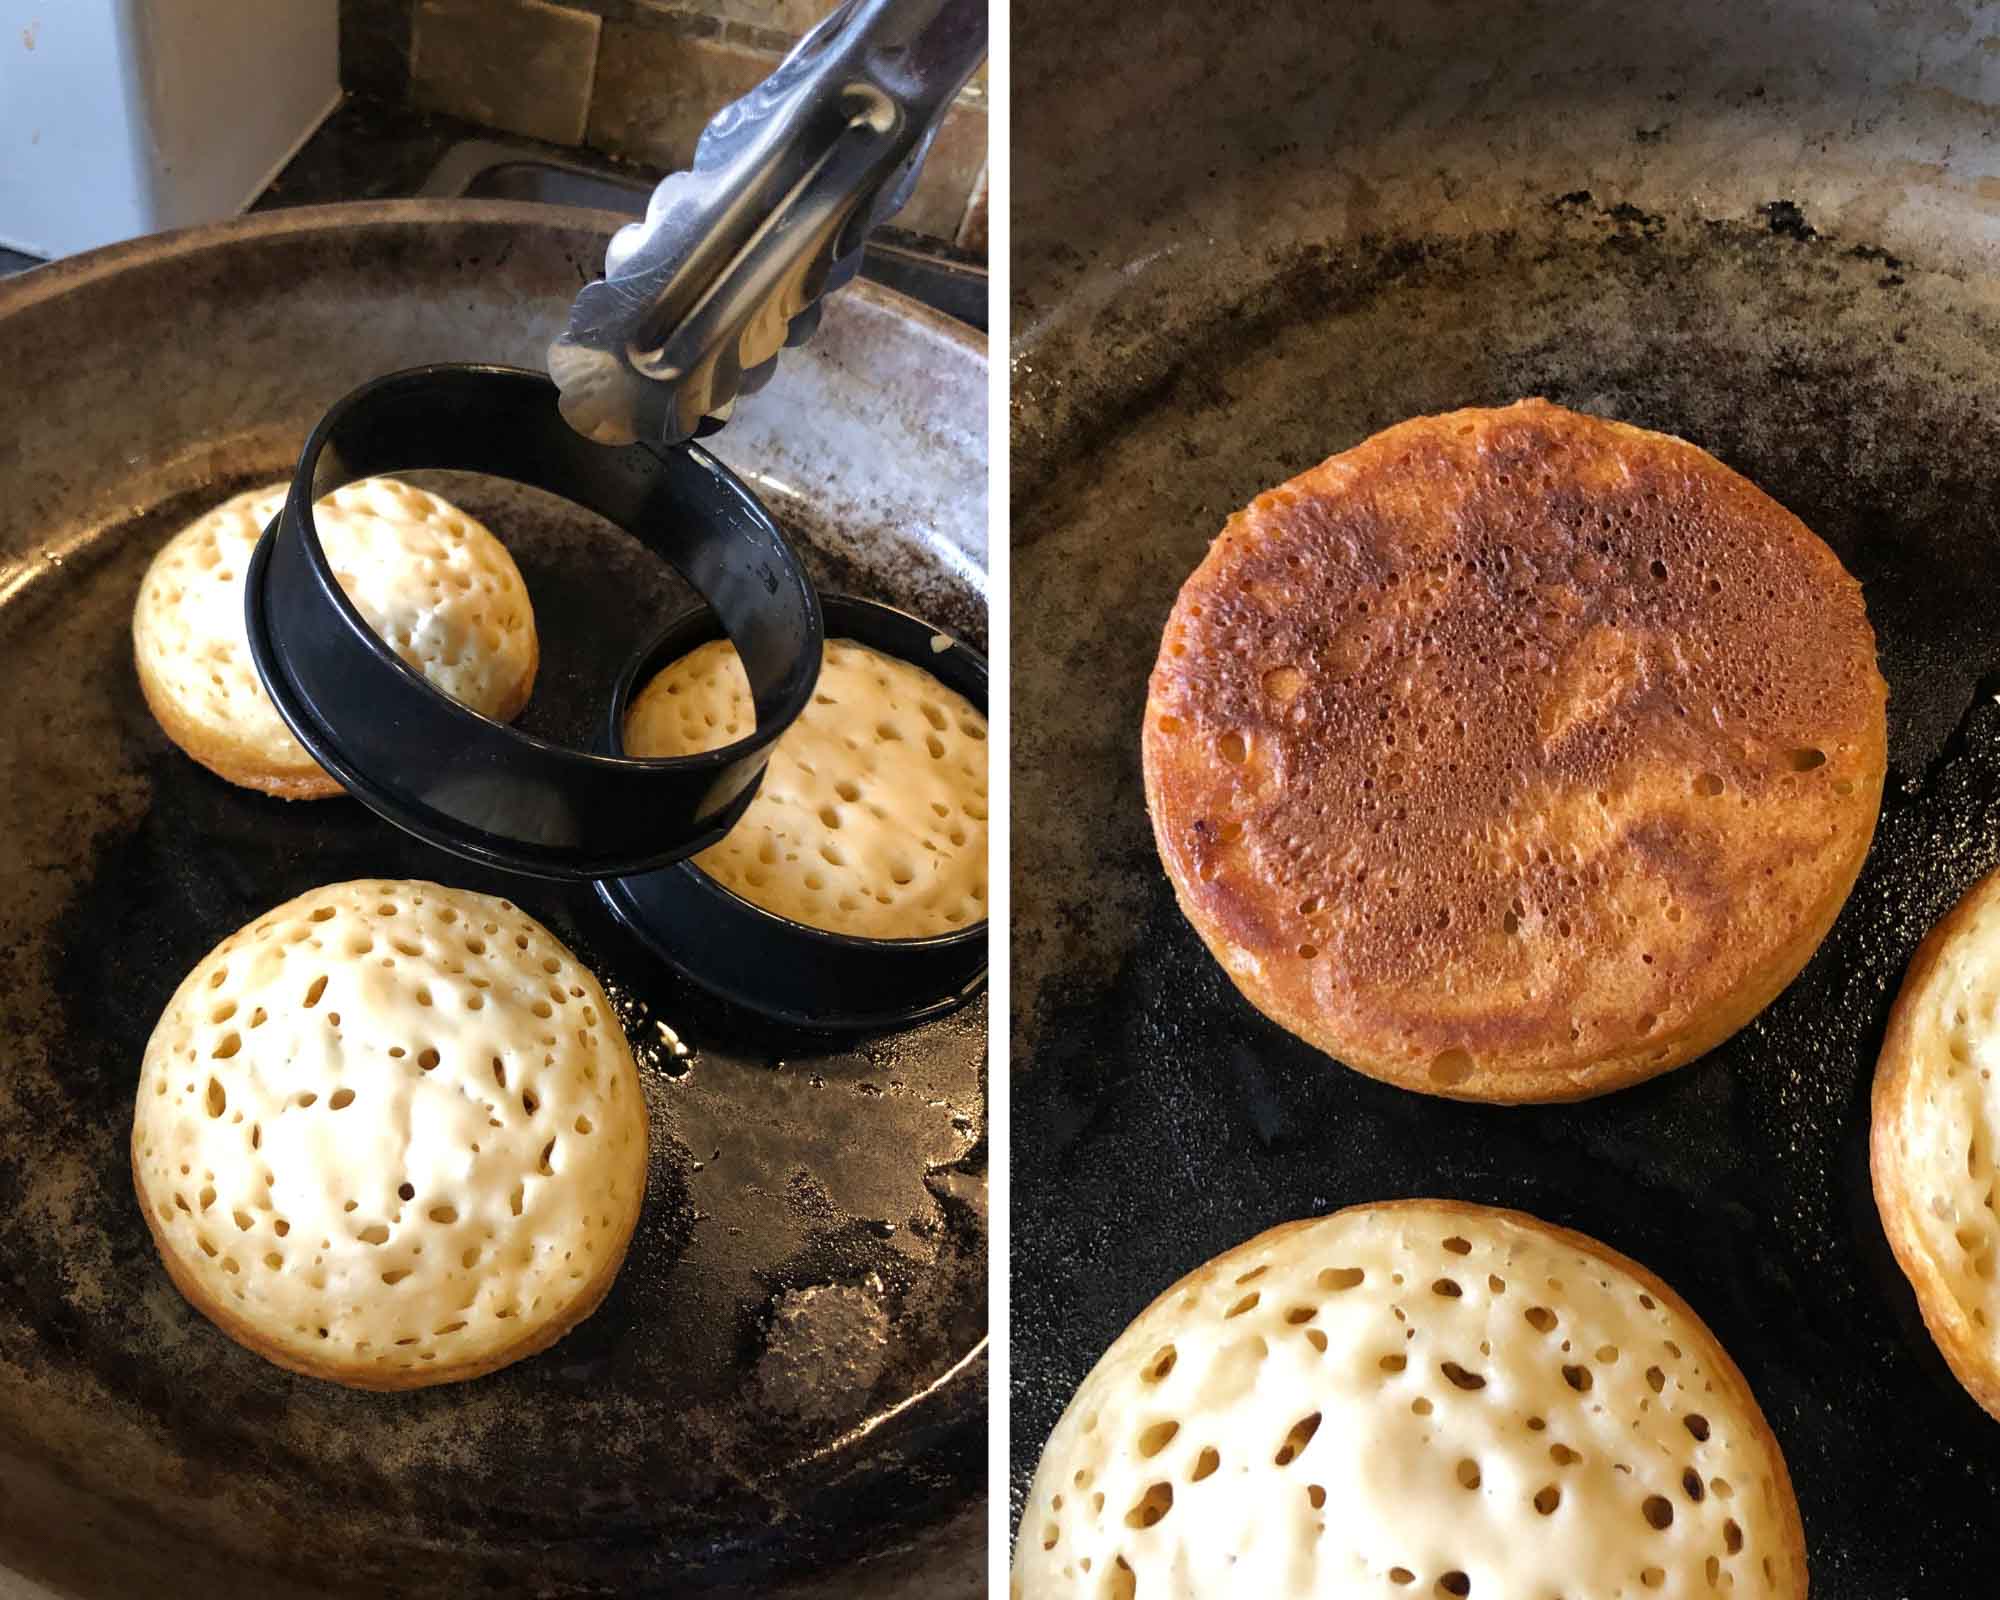 Removing the rings from the crumpets.